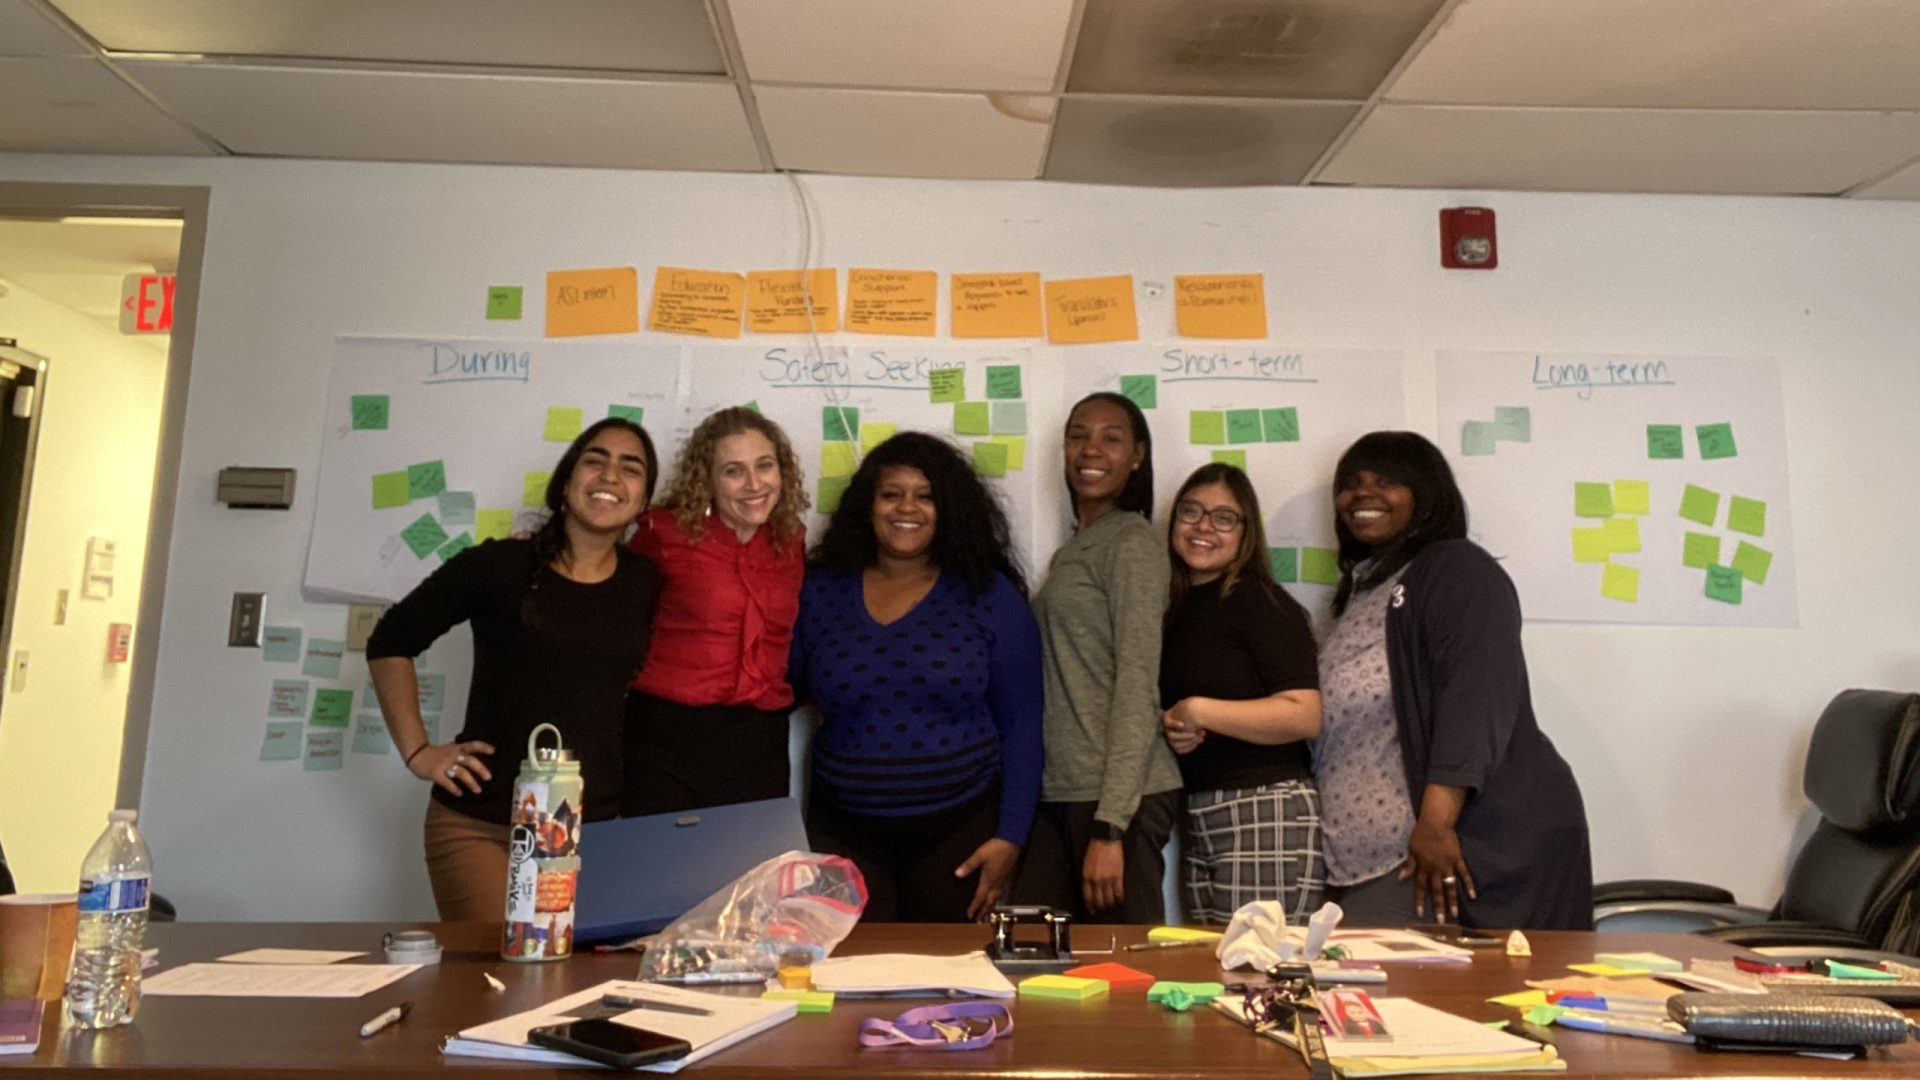 A group of CSAJ staff members and DASH advocates, representing a diverse mix of ethnicities, smiling at camera and standing close together in front of a wall covered in sticky notes.